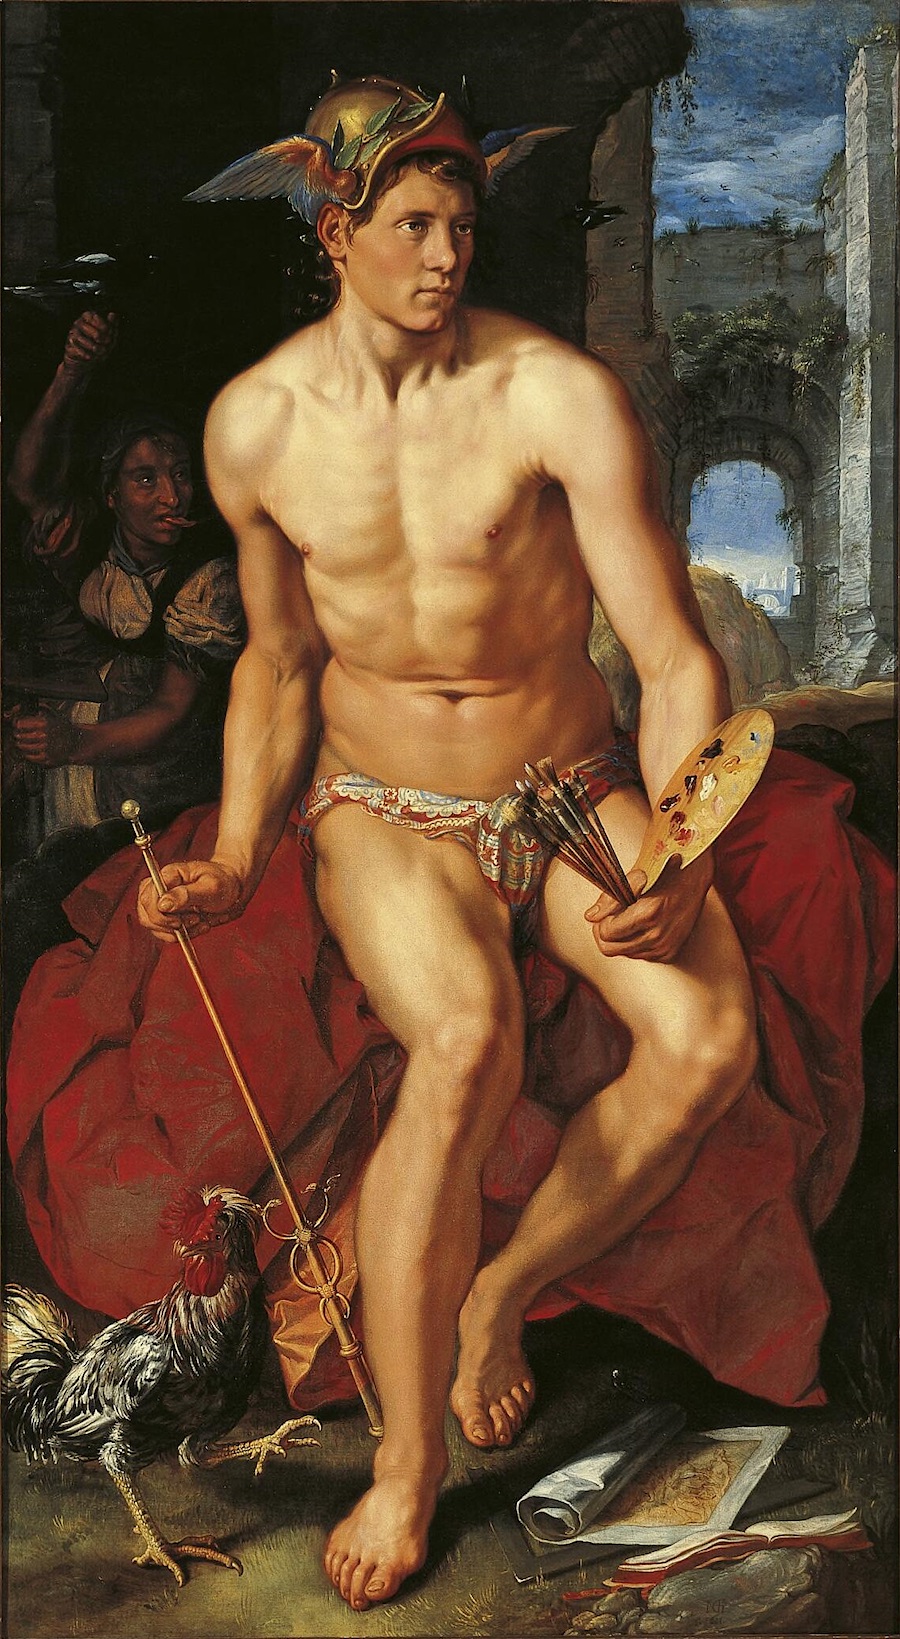 Mercury, a painting by Hendric Goltzius